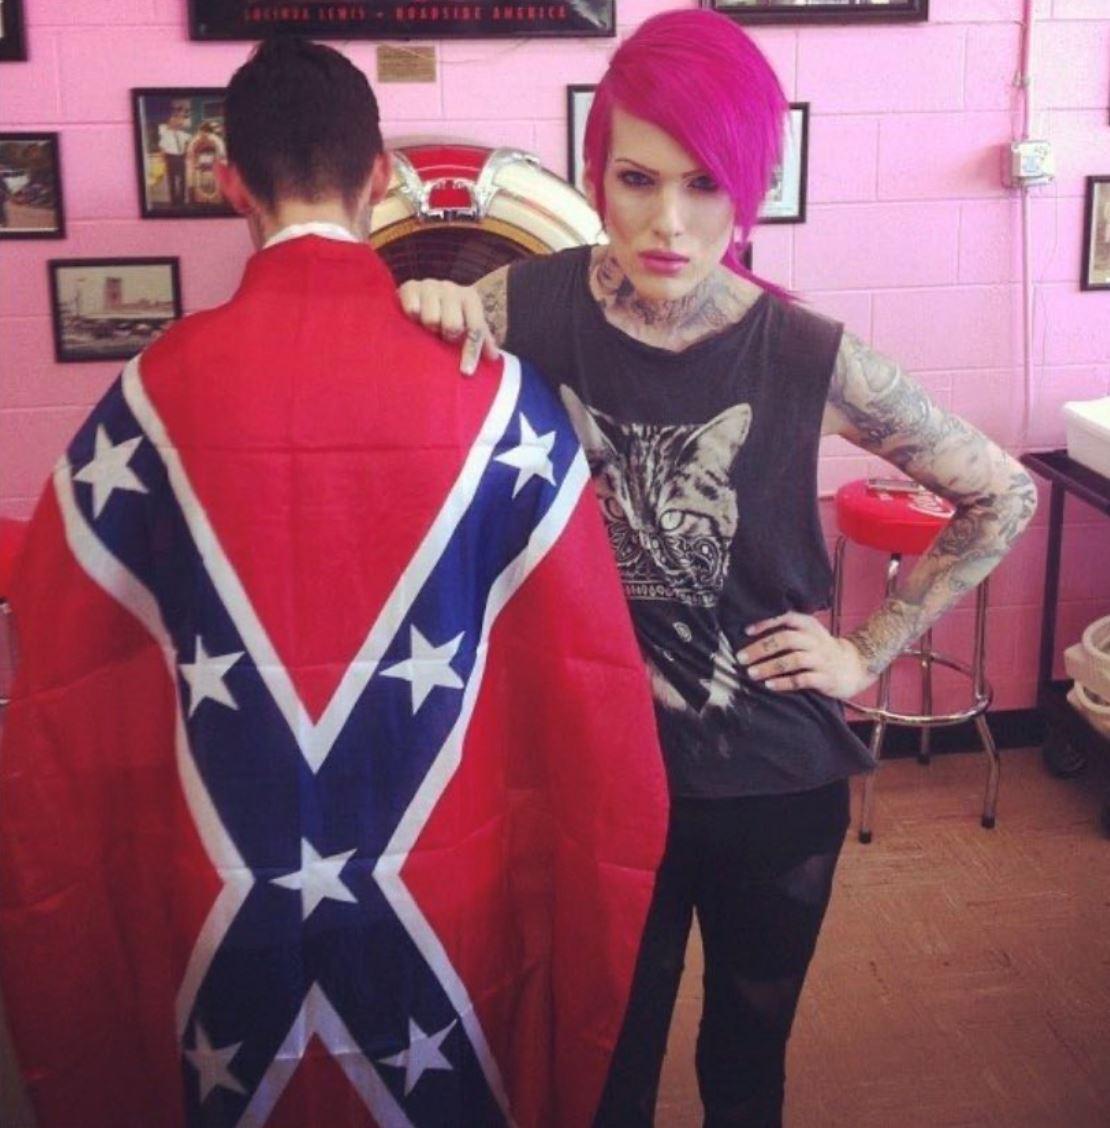 Jeffree Star poses next to fan wearing Confederate Flag